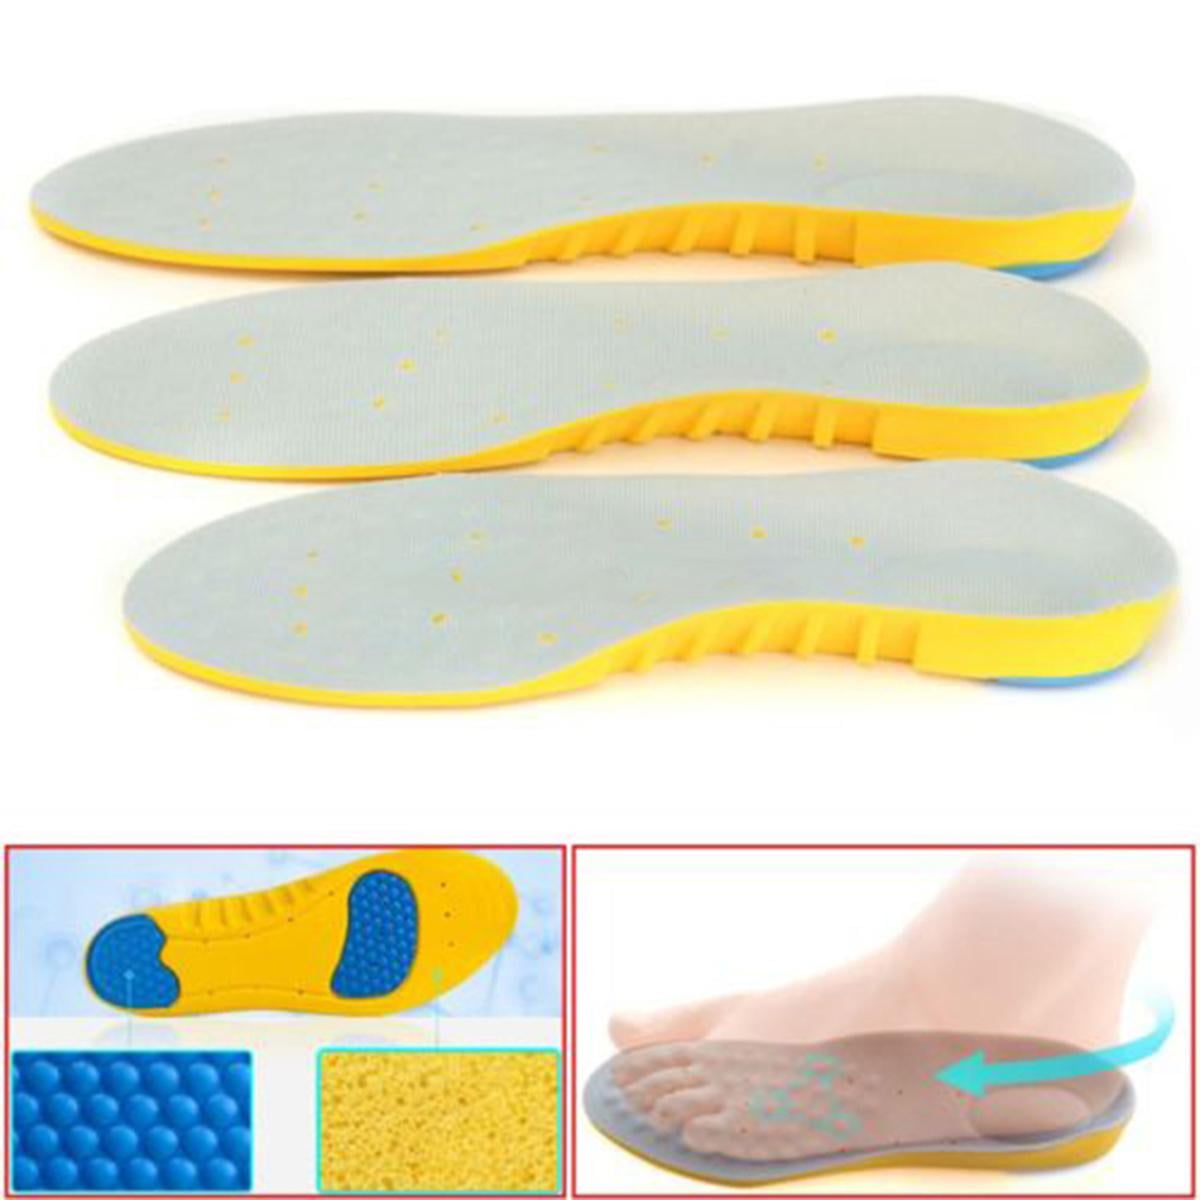 Foam Memory Orthotics Arch Relief Pain Support Shoe Insoles Insert Pads Cushion 